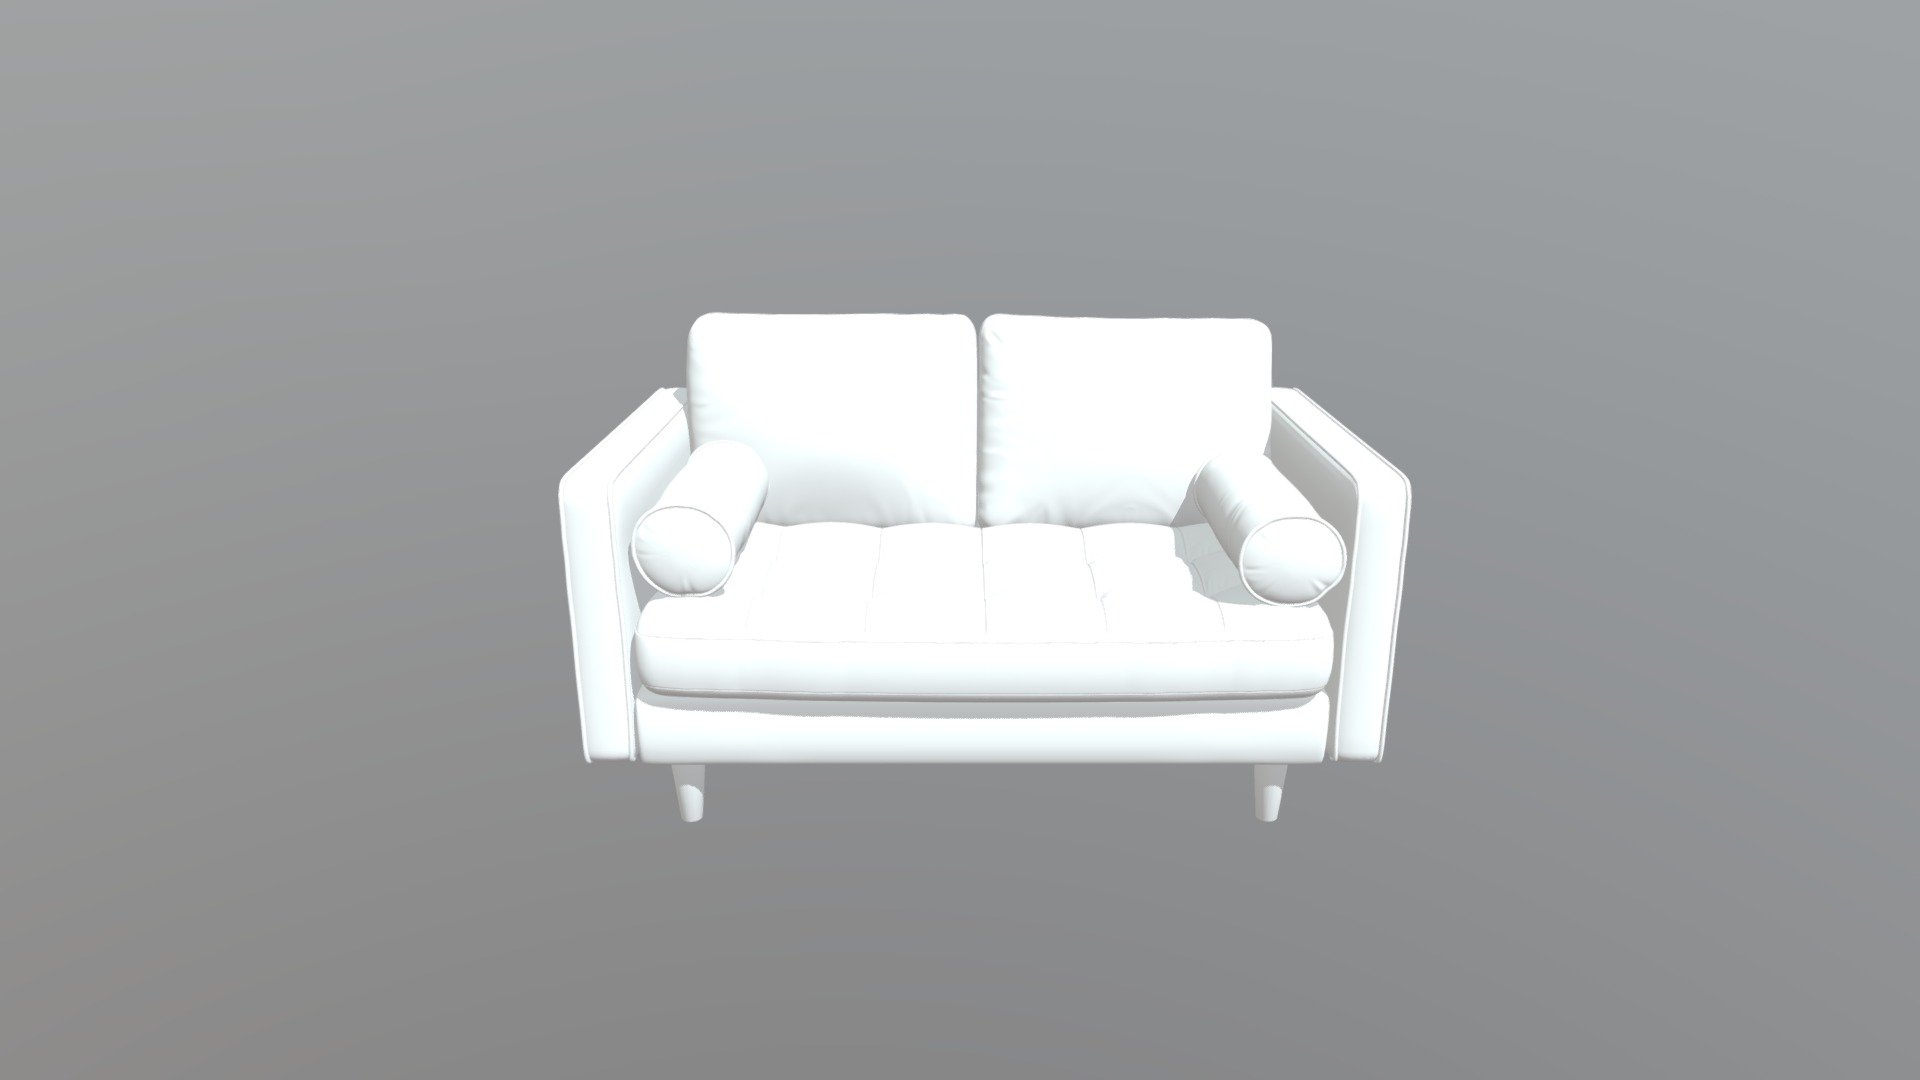 Sofa from 3DS